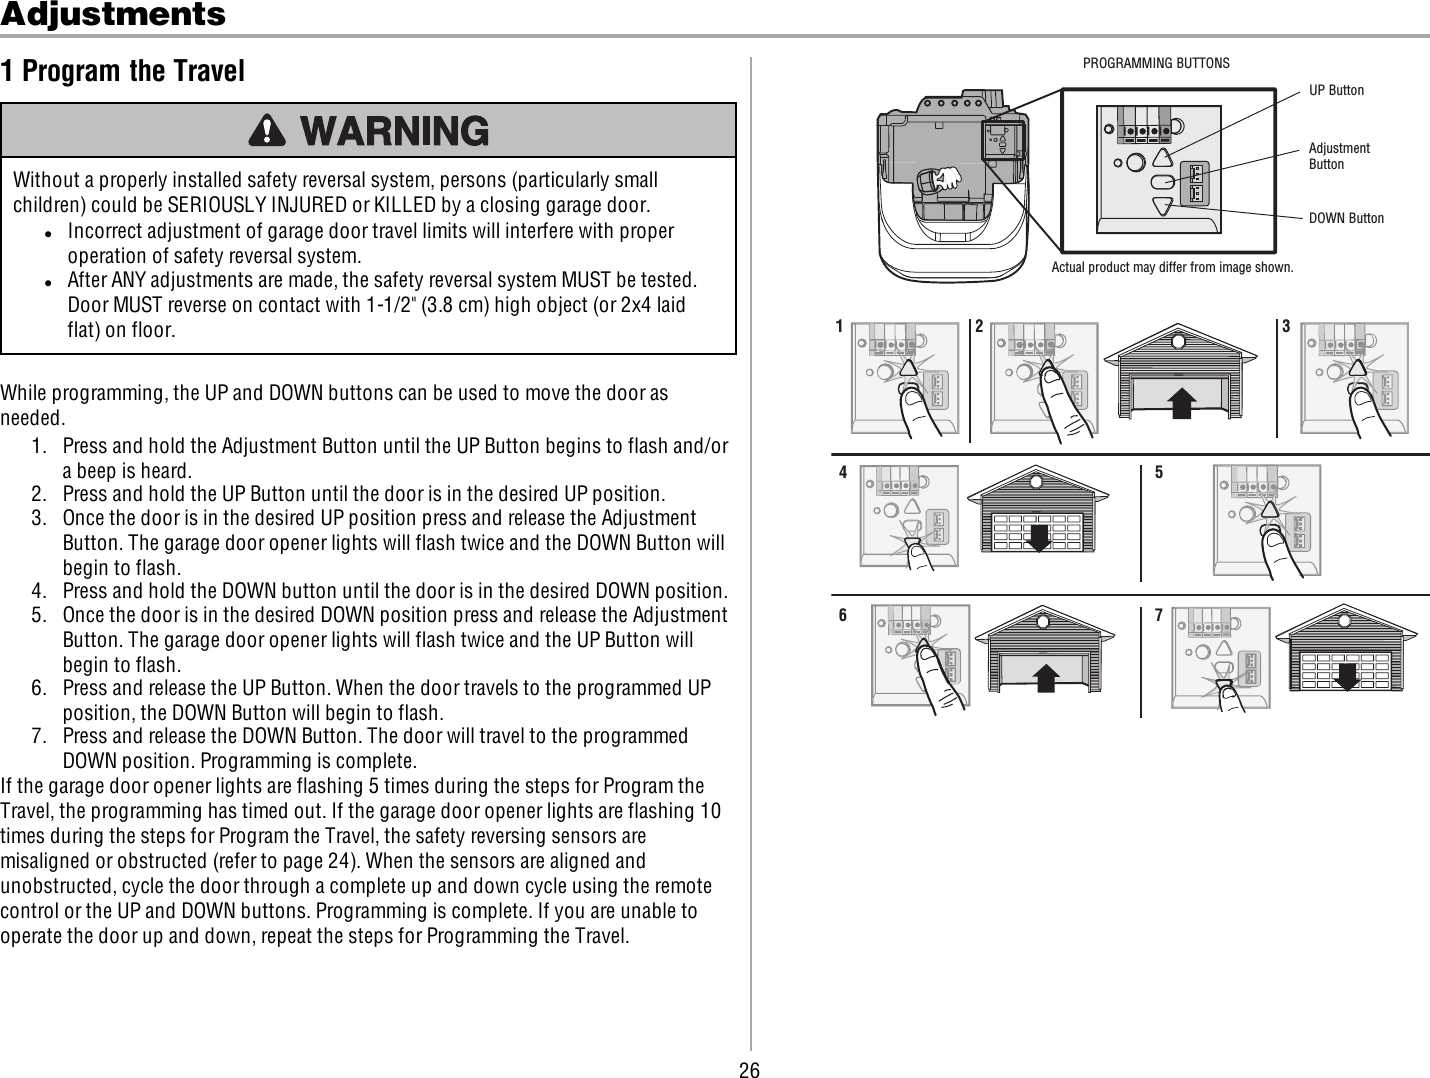 26Adjustments1 Program the TravelWithout a properly installed safety reversal system, persons (particularly smallchildren) could be SERIOUSLY INJURED or KILLED by a closing garage door.lIncorrect adjustment of garage door travel limits will interfere with properoperation of safety reversal system.lAfter ANY adjustments are made, the safety reversal system MUST be tested.Door MUST reverse on contact with 1-1/2&quot; (3.8 cm) high object (or 2x4 laidflat) on floor.While programming, the UP and DOWN buttons can be used to move the door asneeded.1. Press and hold the Adjustment Button until the UP Button begins to flash and/ora beep is heard.2. Press and hold the UP Button until the door is in the desired UP position.3. Once the door is in the desired UP position press and release the AdjustmentButton. The garage door opener lights will flash twice and the DOWN Button willbegin to flash.4. Press and hold the DOWN button until the door is in the desired DOWN position.5. Once the door is in the desired DOWN position press and release the AdjustmentButton. The garage door opener lights will flash twice and the UP Button willbegin to flash.6. Press and release the UP Button. When the door travels to the programmed UPposition, the DOWN Button will begin to flash.7. Press and release the DOWN Button. The door will travel to the programmedDOWN position. Programming is complete.If the garage door opener lights are flashing 5 times during the steps for Program theTravel, the programming has timed out. If the garage door opener lights are flashing 10times during the steps for Program the Travel, the safety reversing sensors aremisaligned or obstructed (refer to page 24). When the sensors are aligned andunobstructed, cycle the door through a complete up and down cycle using the remotecontrol or the UP and DOWN buttons. Programming is complete. If you are unable tooperate the door up and down, repeat the steps for Programming the Travel.UP ButtonAdjustment ButtonDOWN ButtonActual product may differ from image shown.PROGRAMMING BUTTONS1 2 34567